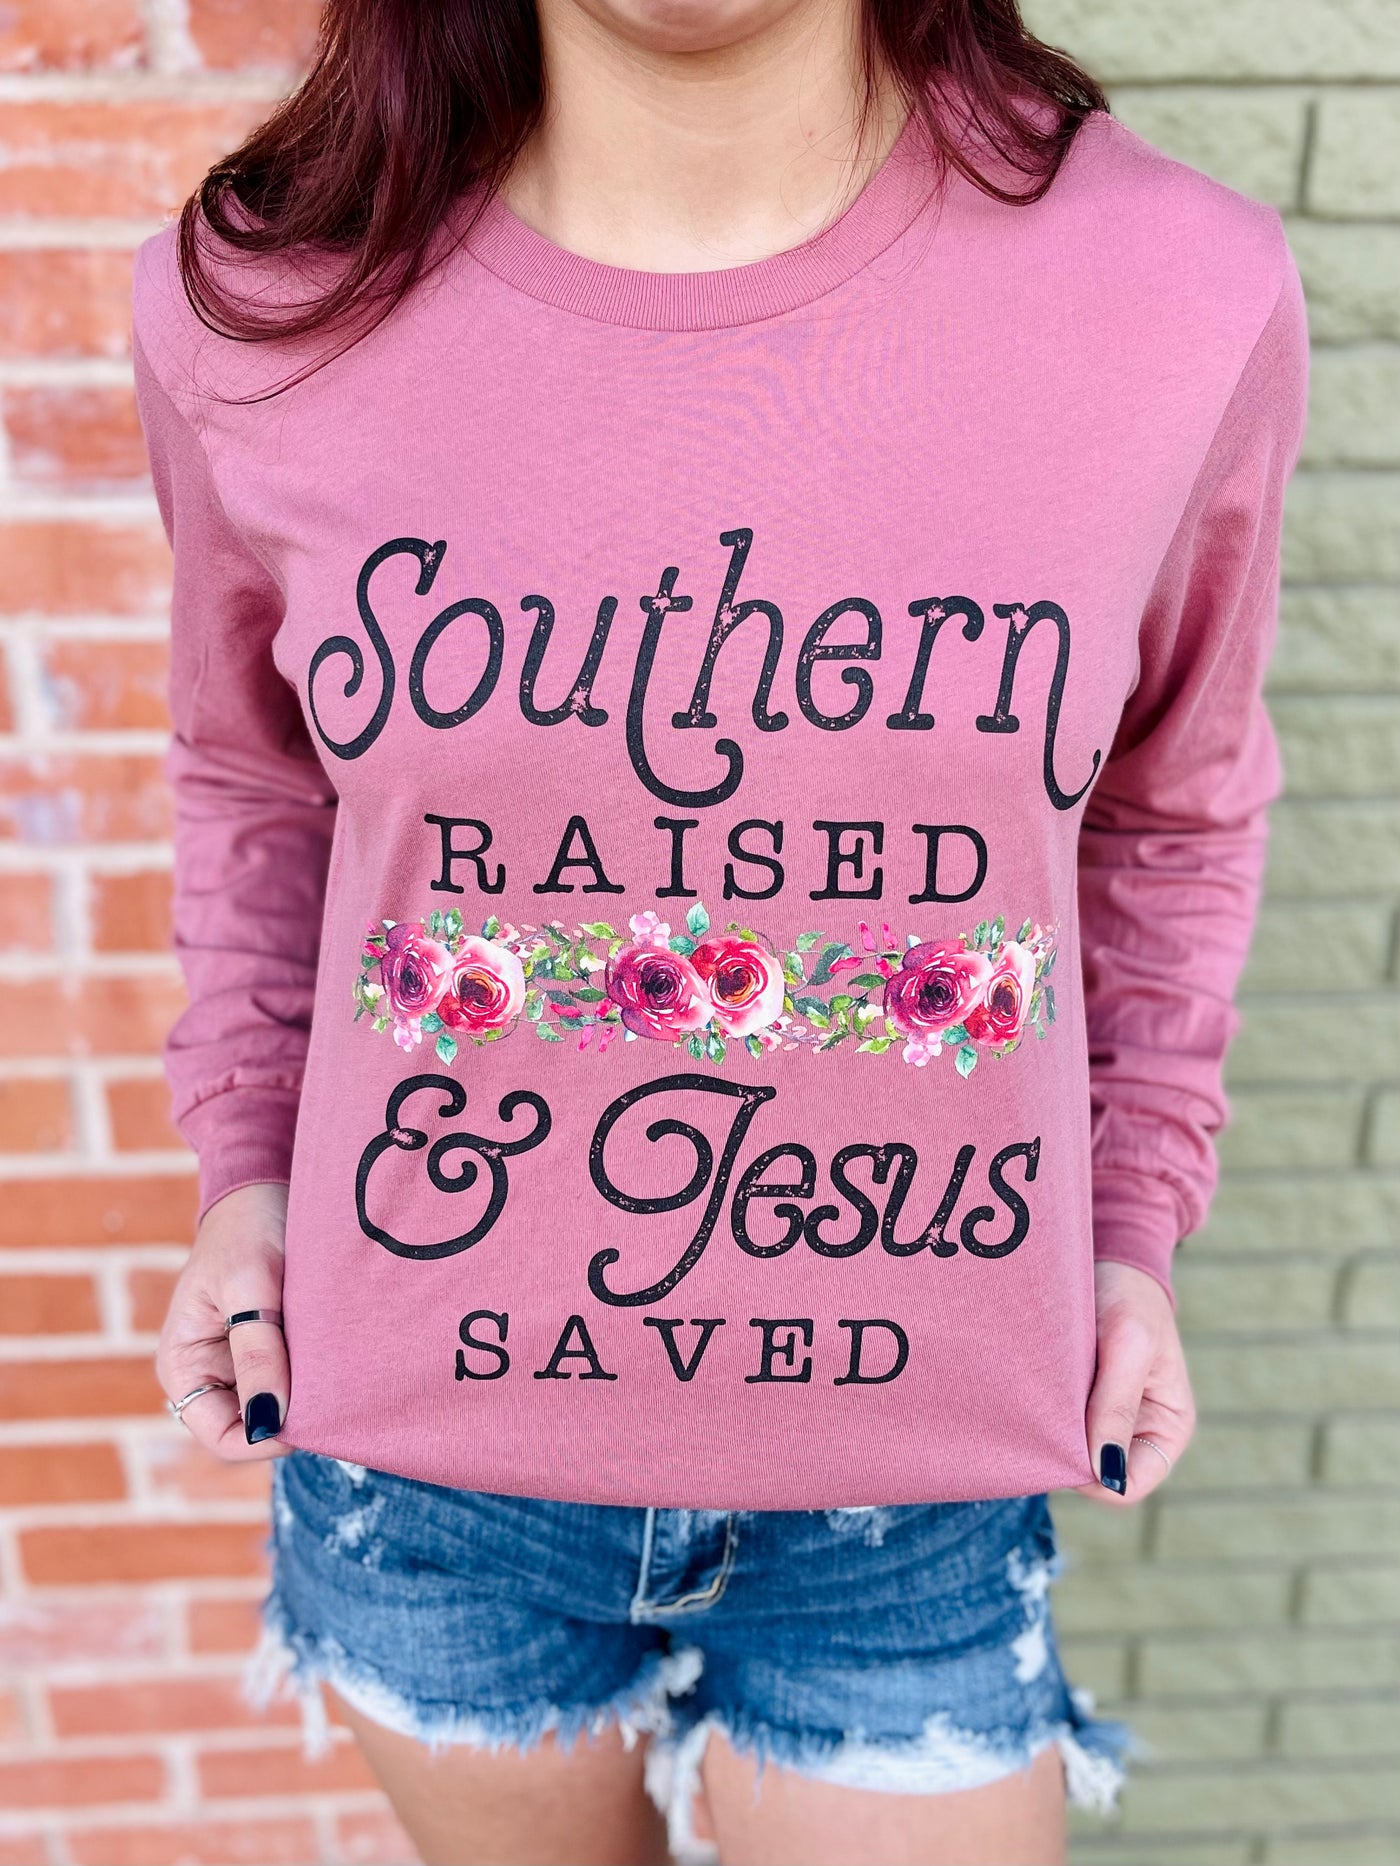 Southern Raised Jesus Saved Graphic Tee-Harps & Oli-Shop Anchored Bliss Women's Boutique Clothing Store